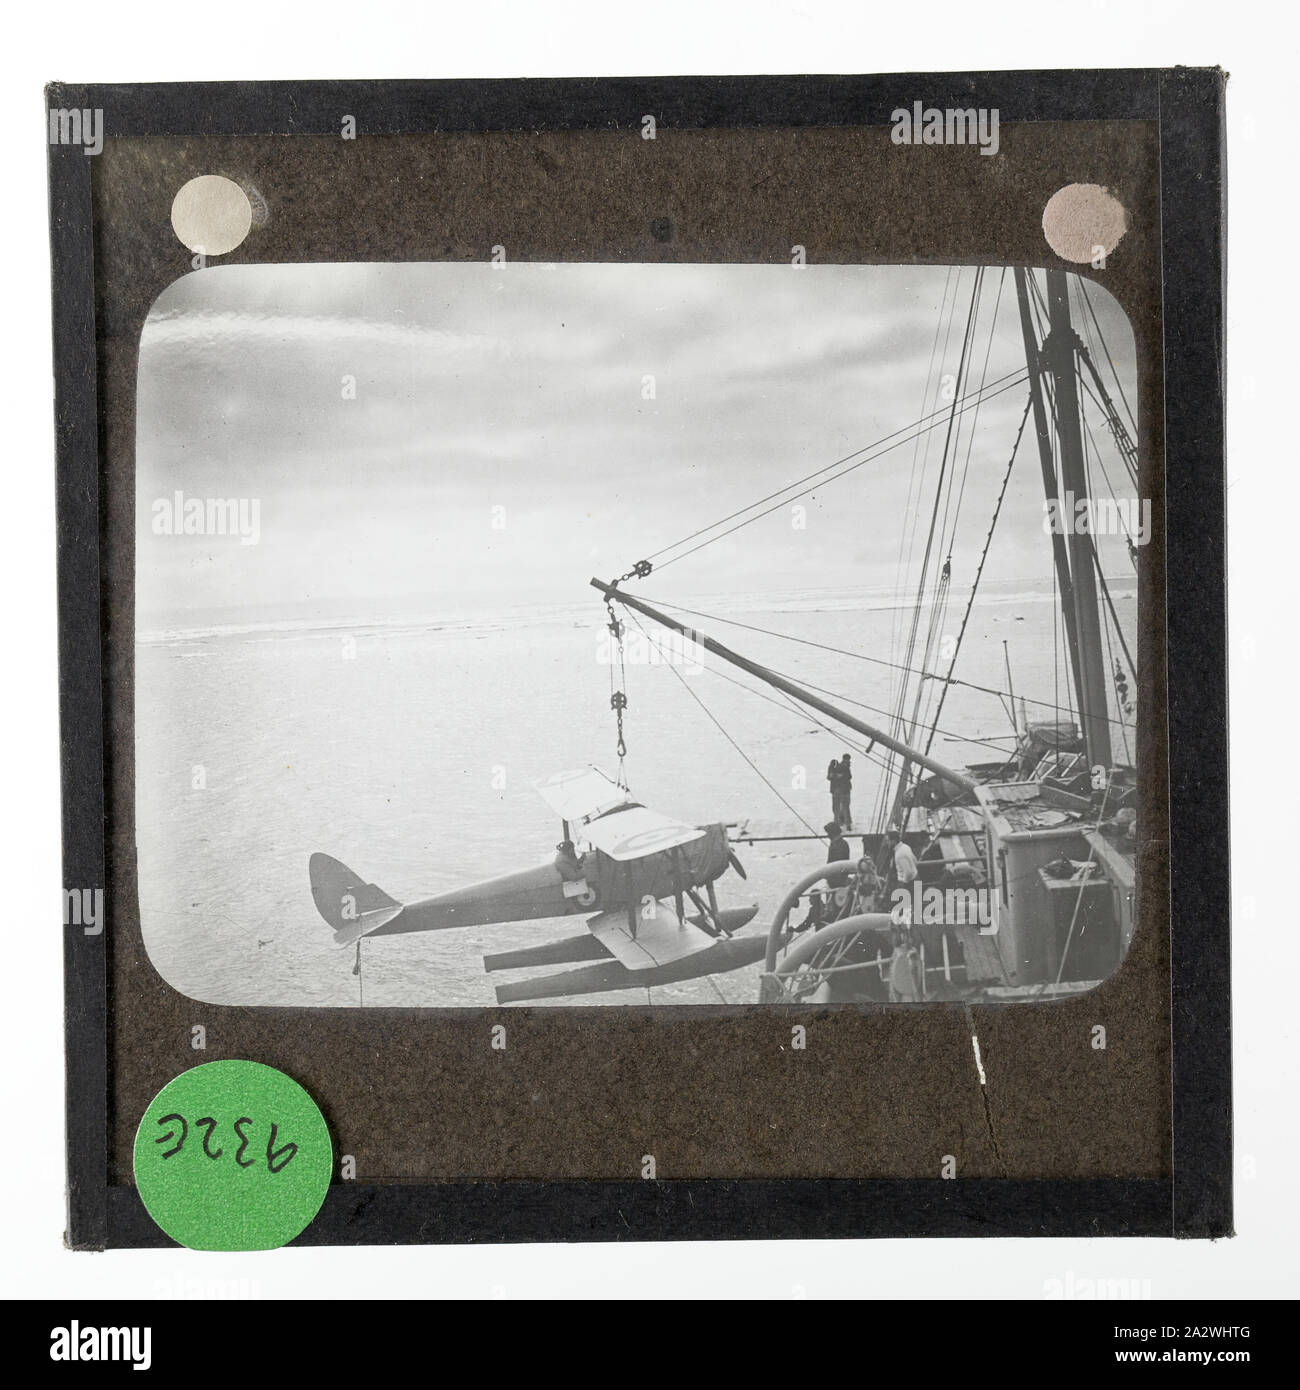 Lantern Slide - Gipsy Moth A7-55 on the Lifting Hook, Ross Sea, Ellsworth Relief Expedition, Antarctica, 12 Jan 1936, Lantern slide of the Gipsy Moth A7-55 on the lifting hook of the Discovery II, Antarctica. One of 328 images in various formats including artworks, photographs, glass negatives and lantern slides Stock Photo